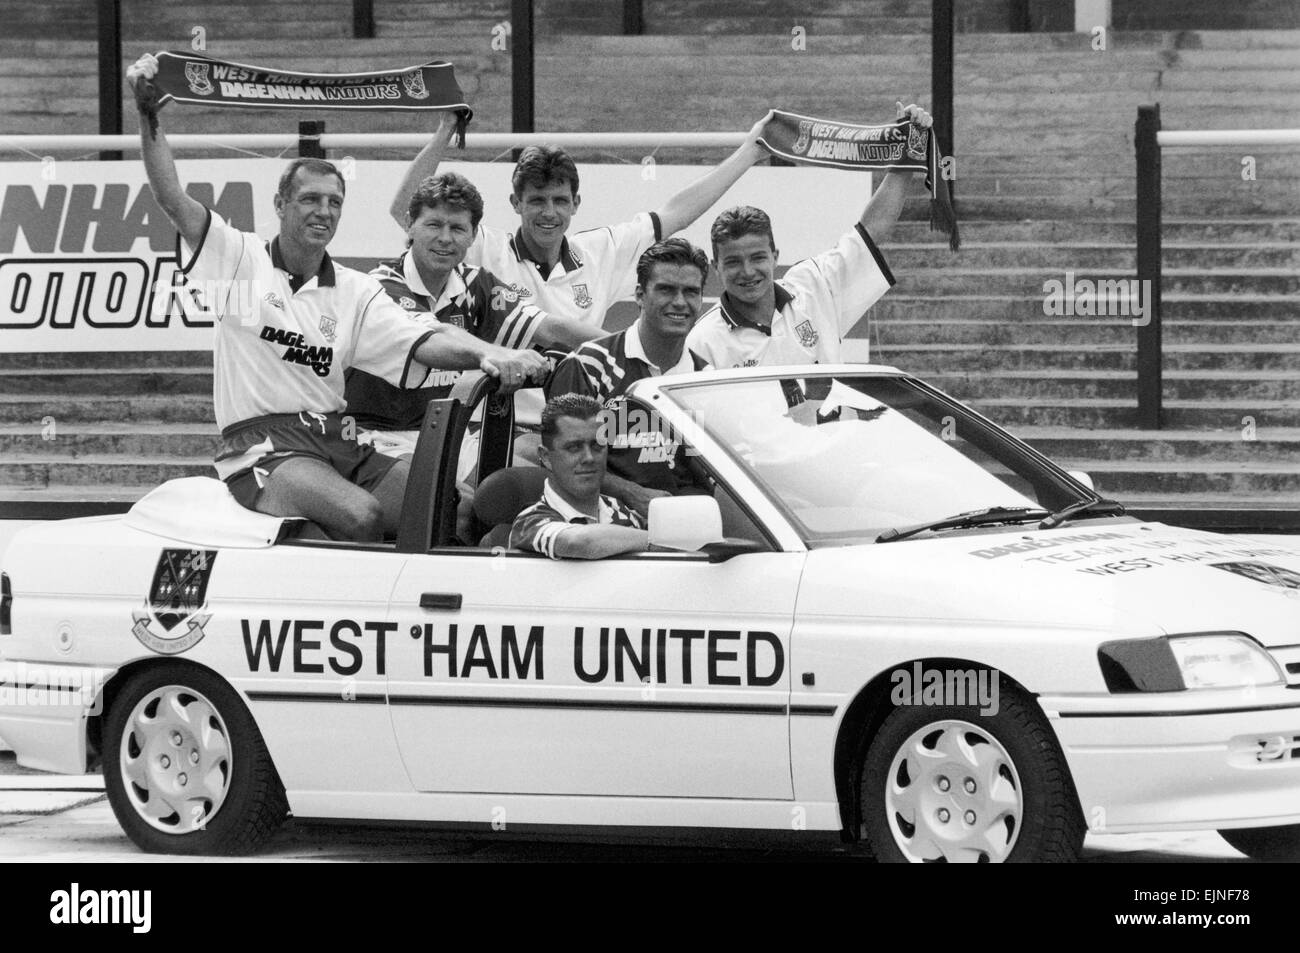 West Ham footballer Julian Dicks takes the driving seat as the West Ham team announce Dagenham Motors as their new kit sponsors. Left to right behind Julian are: Alvin Martin, Clive Allen, Tony Gale, Steve Potts and Stuart Slater. 7th August 1992. Stock Photo